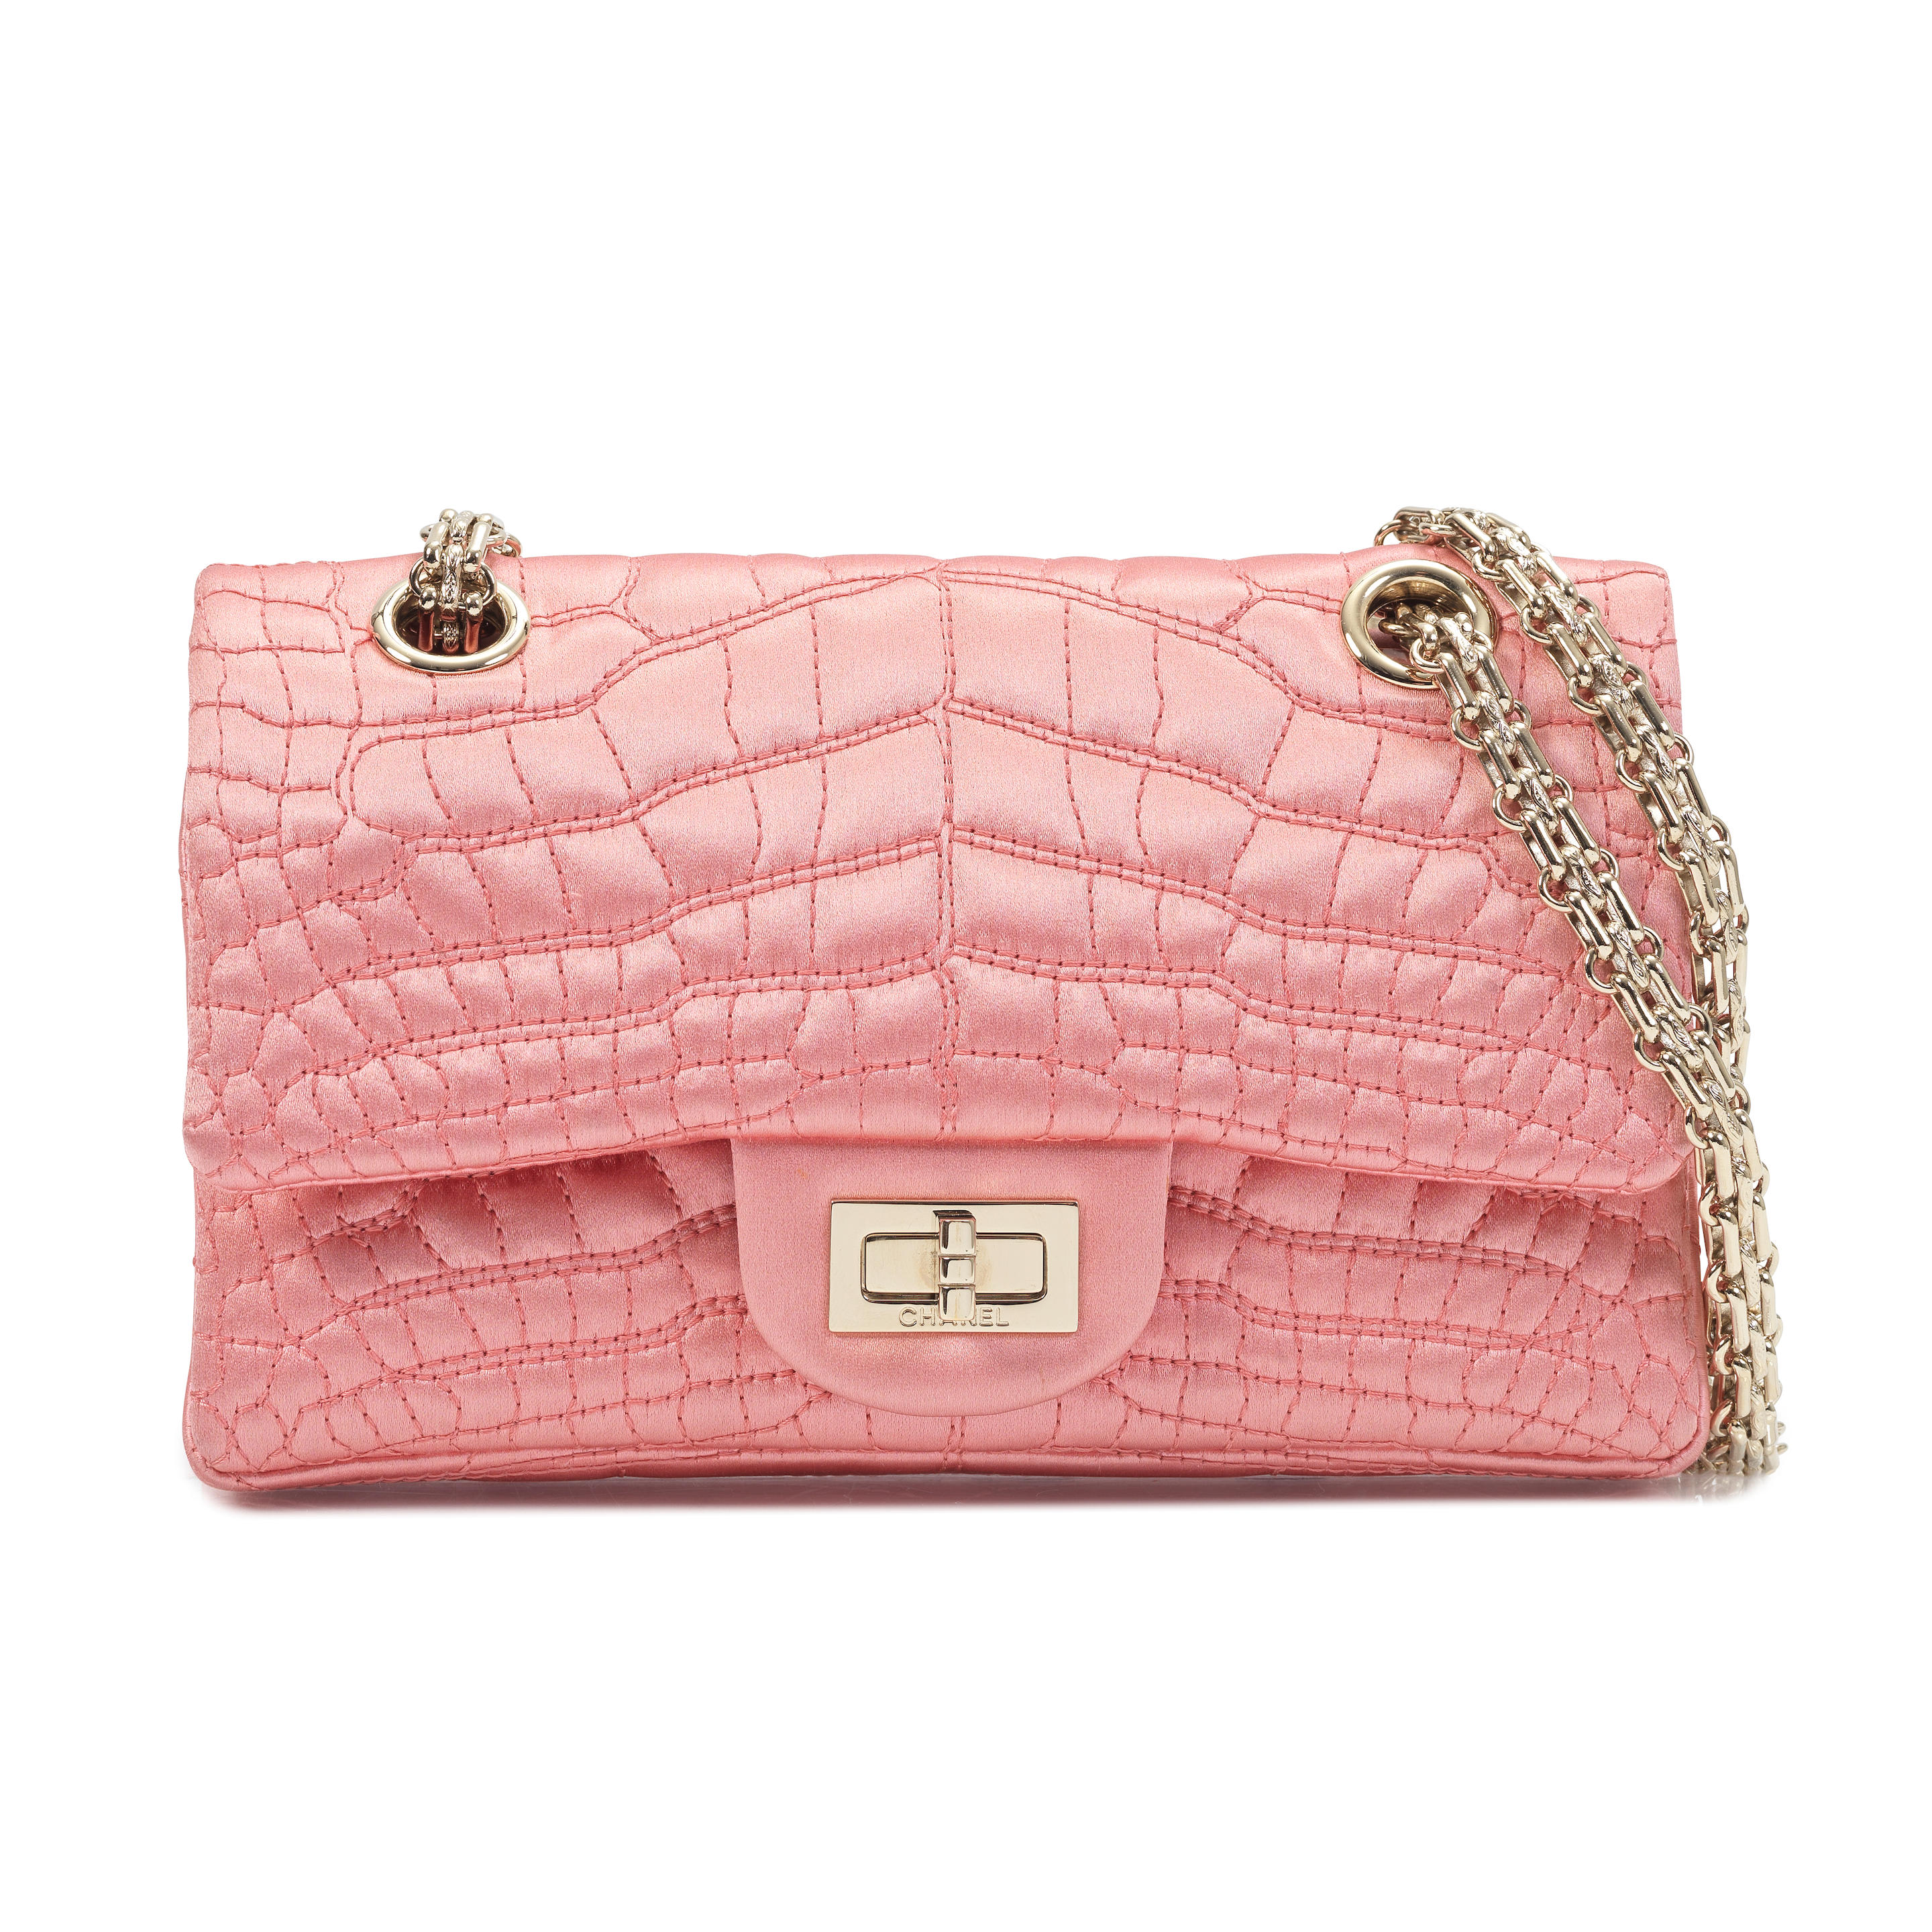 Chanel - Pouch on Chain - Pink Crocodile - Vintage - Pre-loved